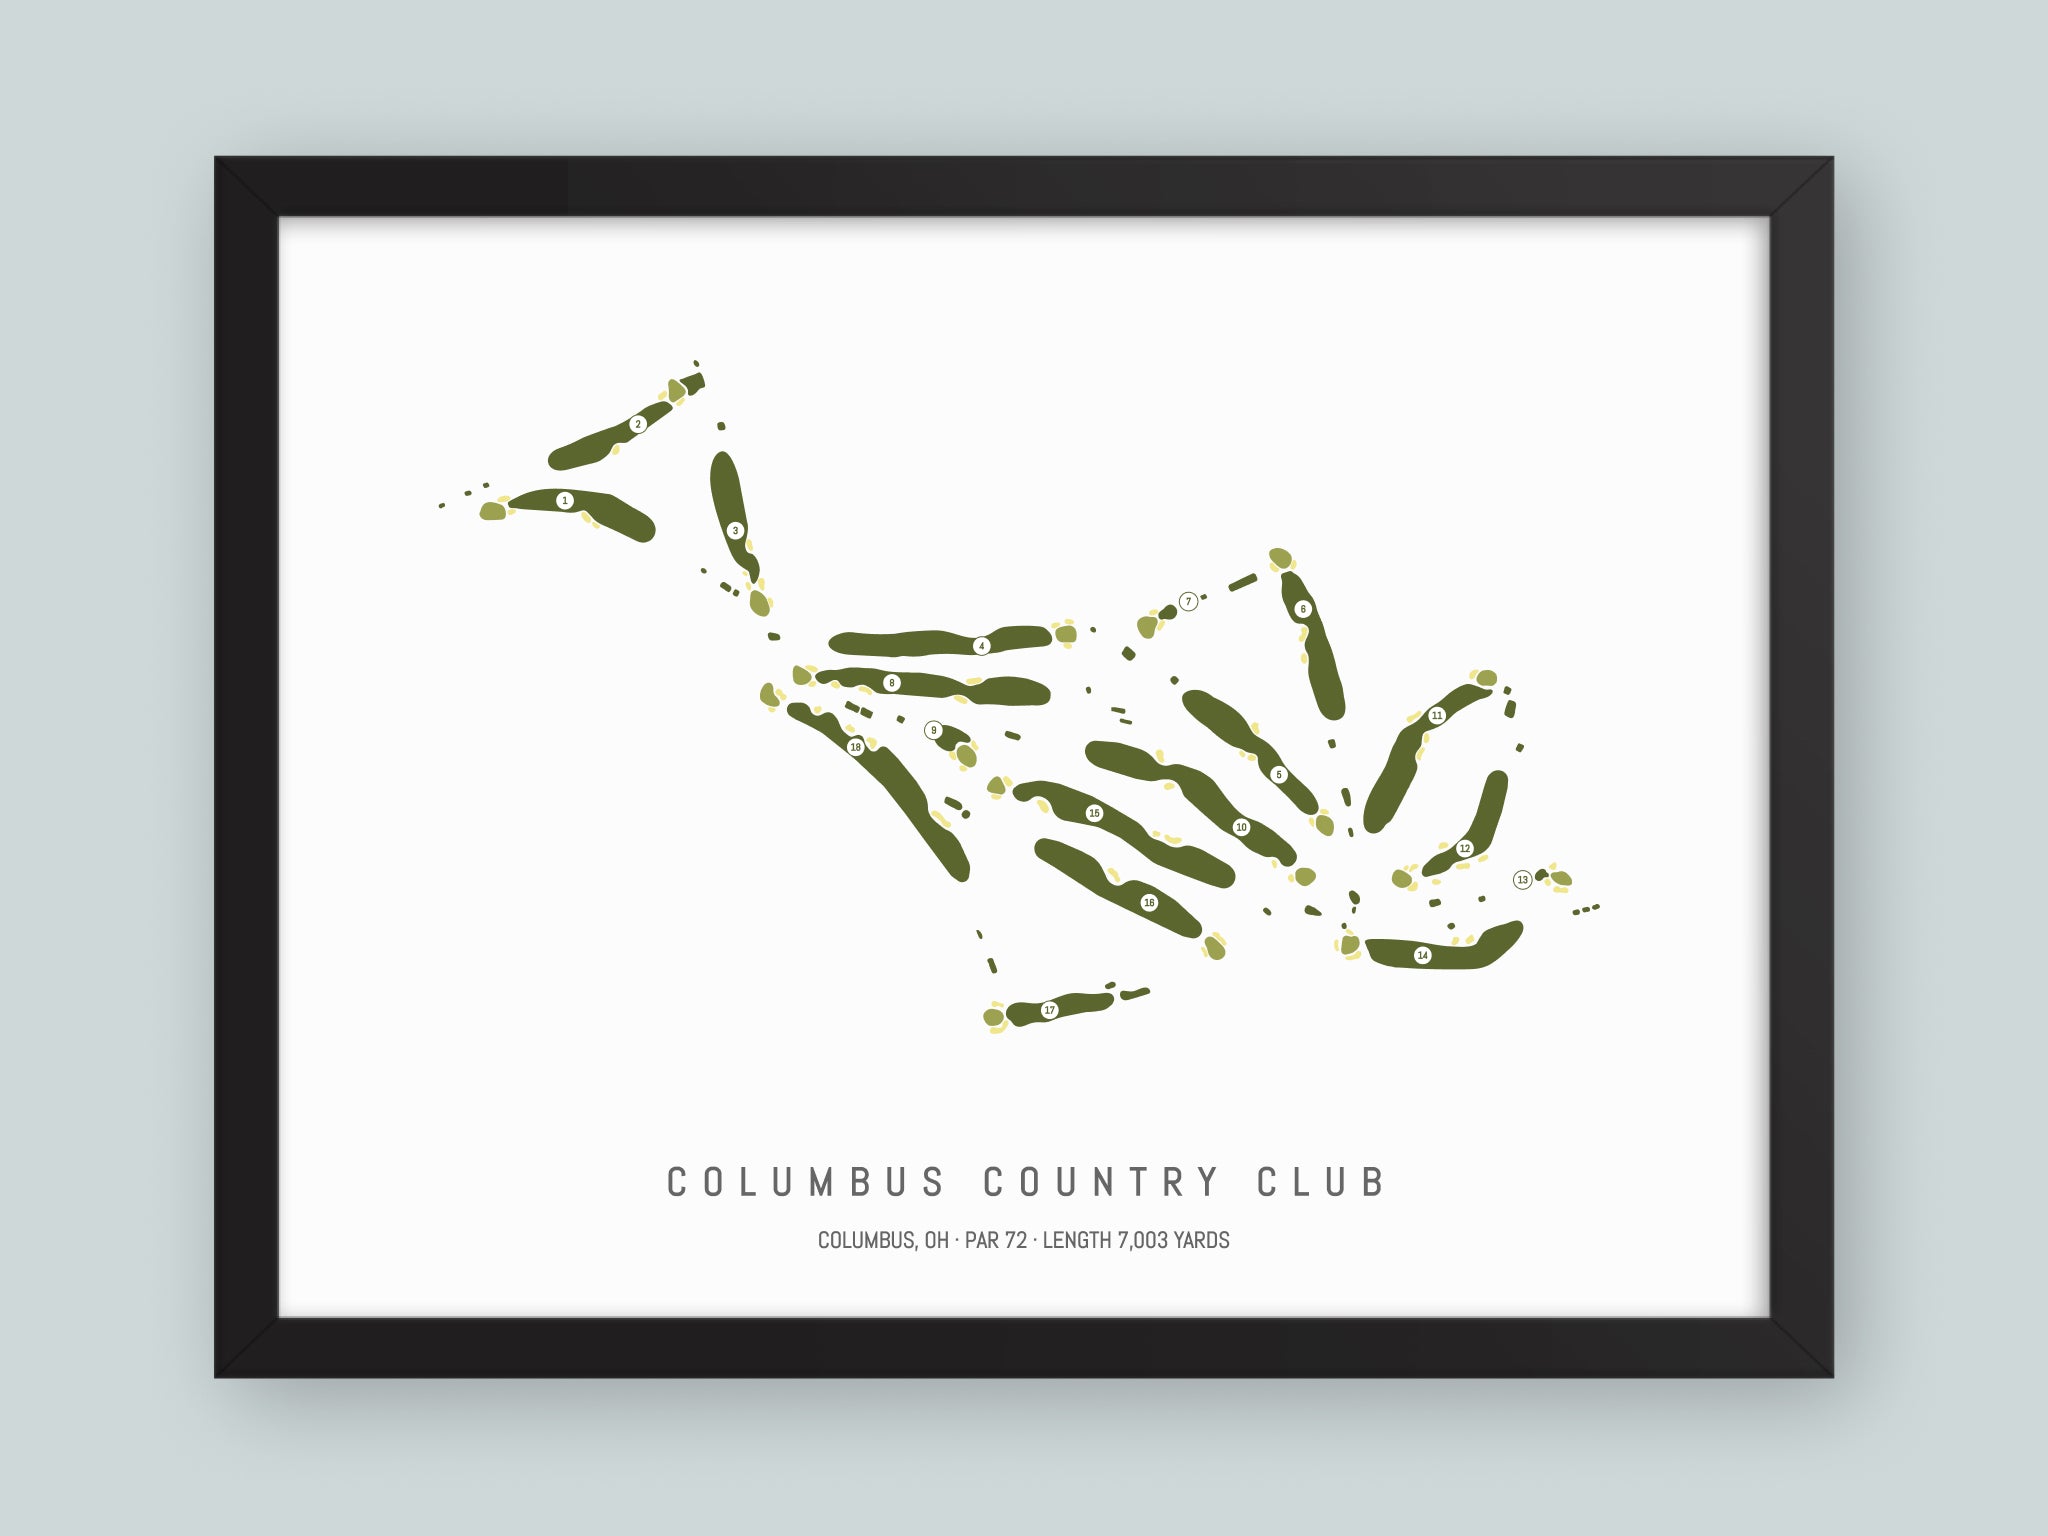 Columbus-Country-Club-OH--Black-Frame-24x18-With-Hole-Numbers